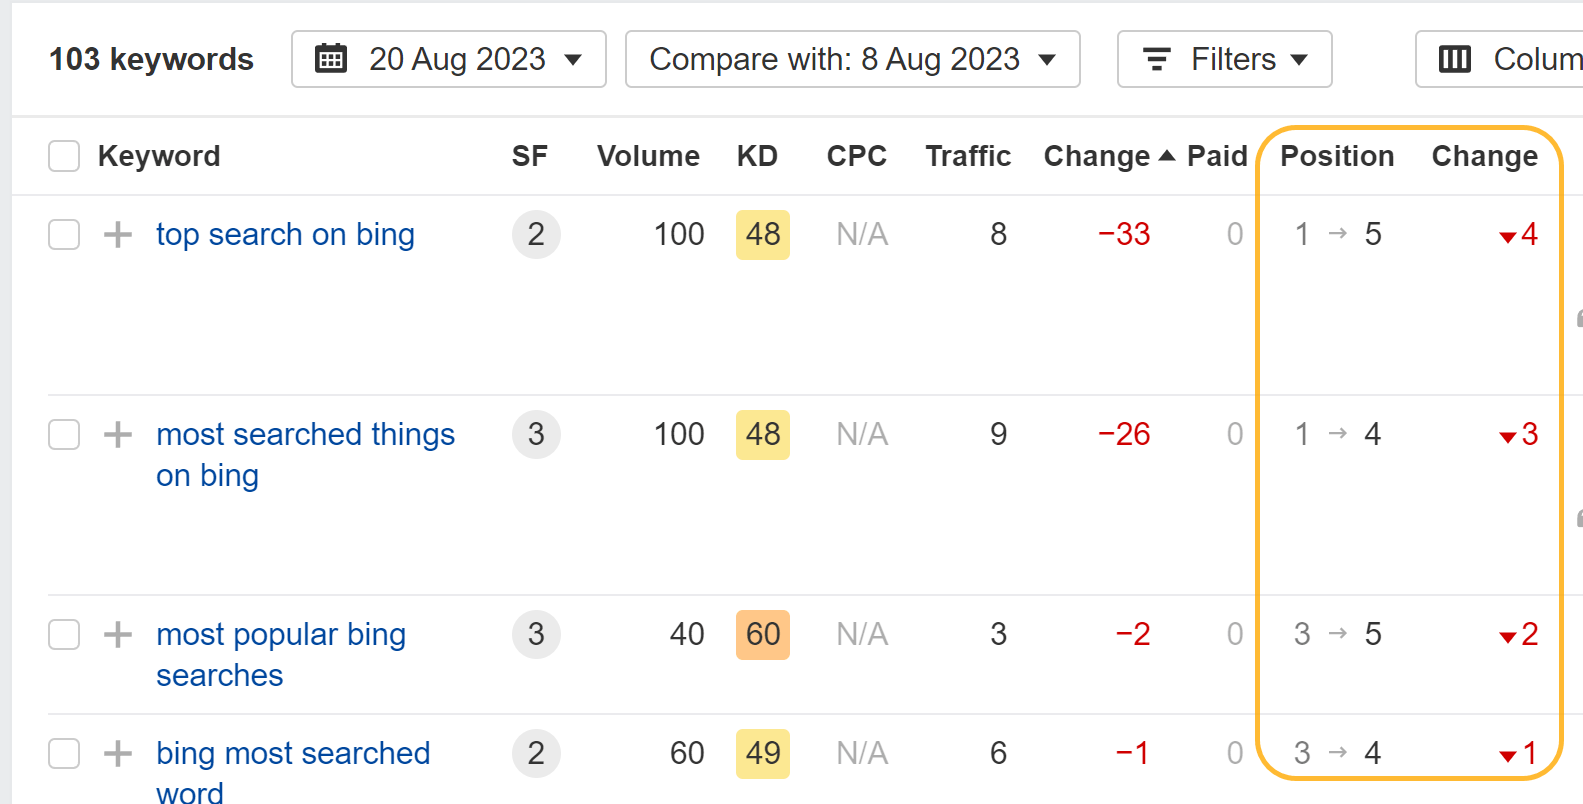 Impact on rankings on our "top Bing searches" page from removing the content. Ahrefs' data